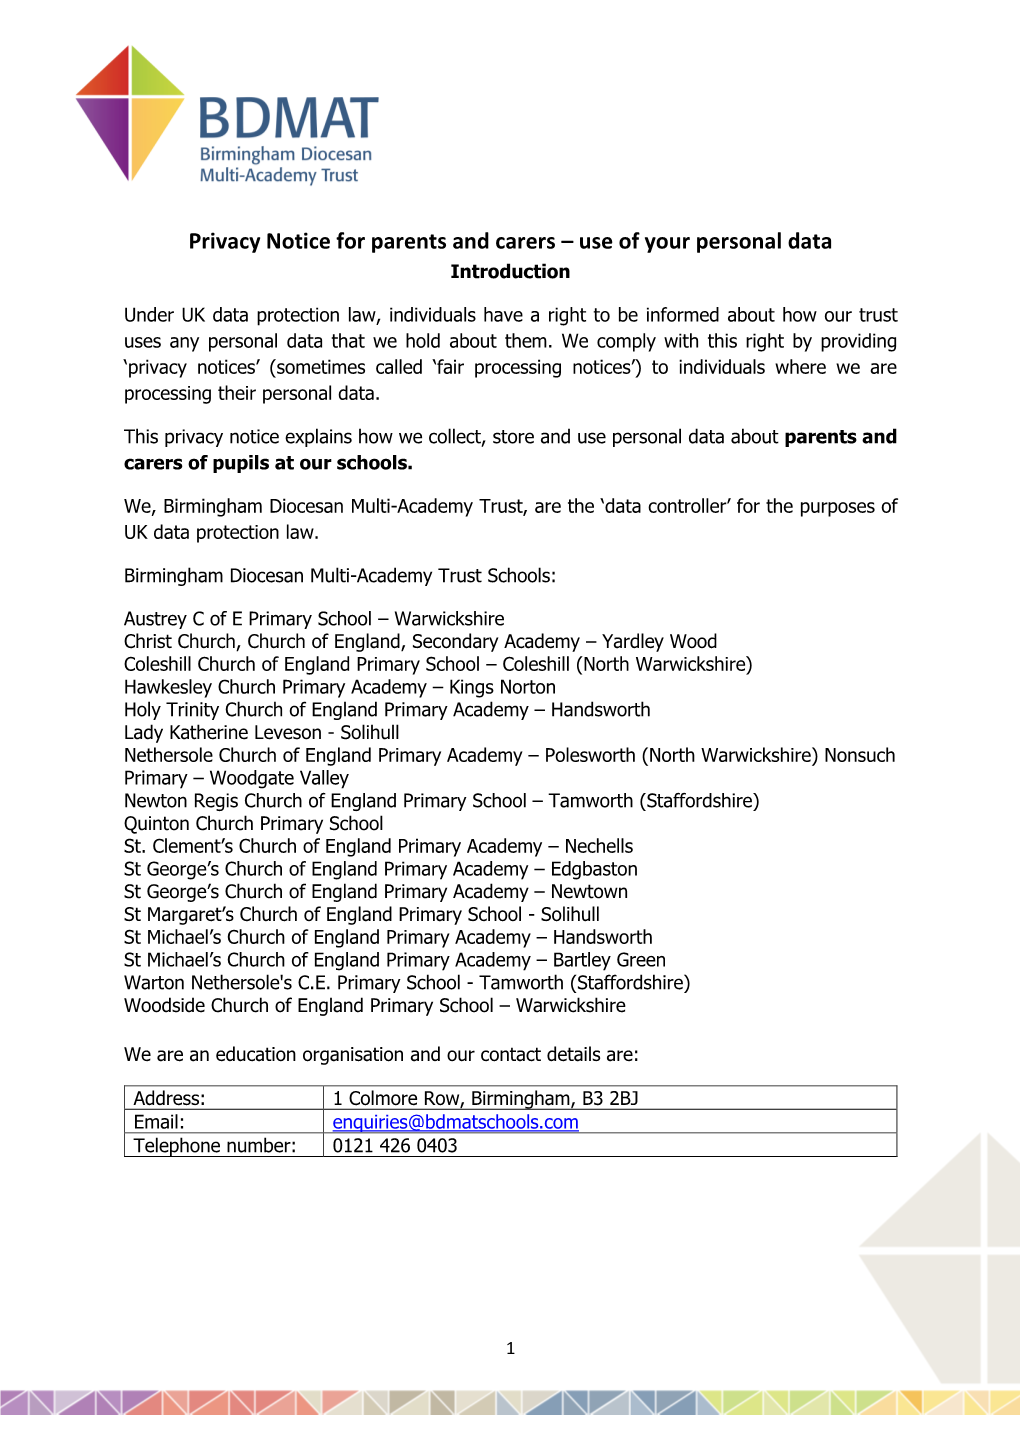 Privacy Notice for Parents and Carers – Use of Your Personal Data Introduction